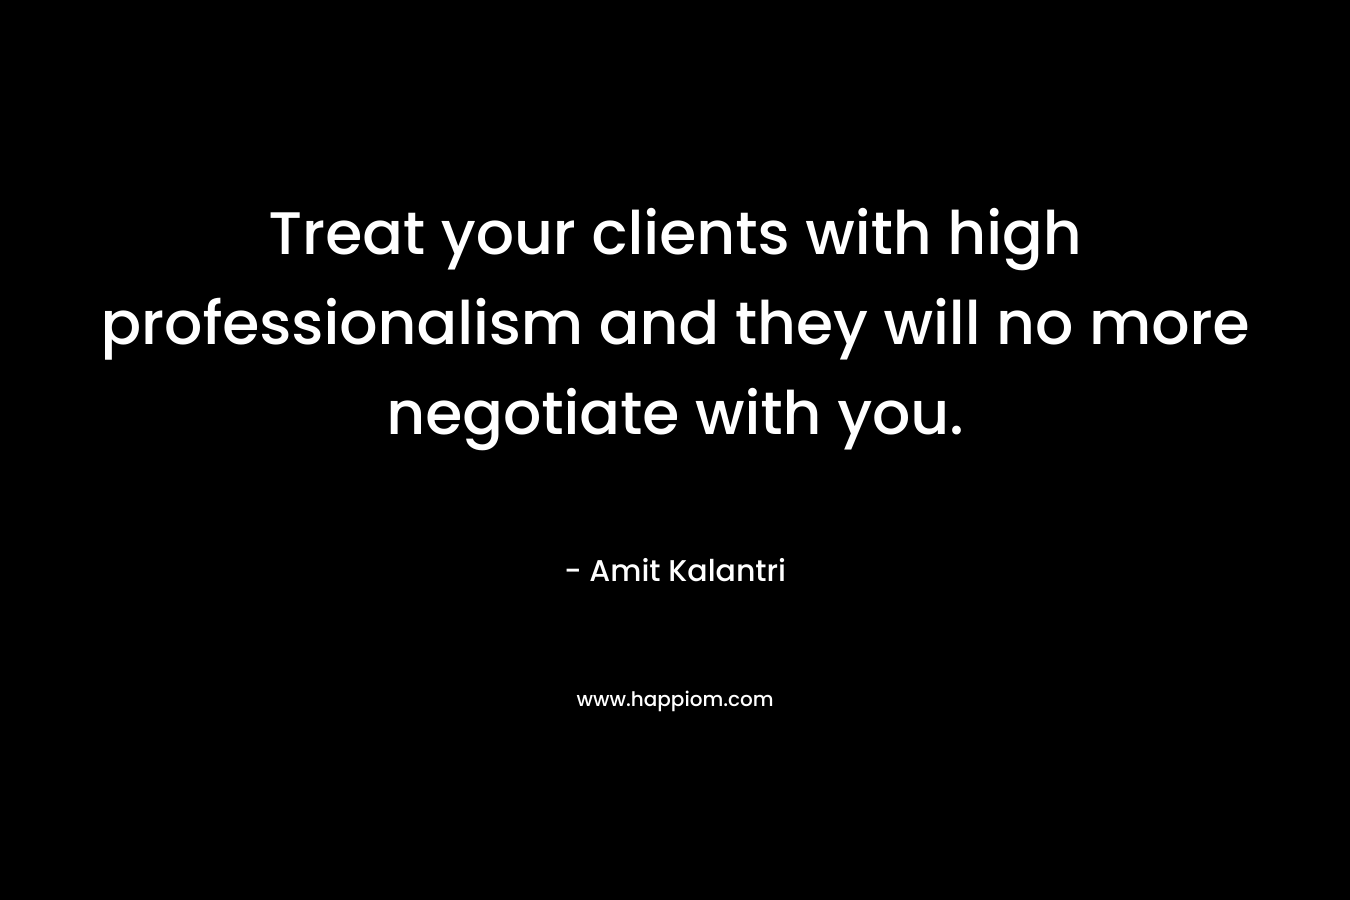 Treat your clients with high professionalism and they will no more negotiate with you. – Amit Kalantri